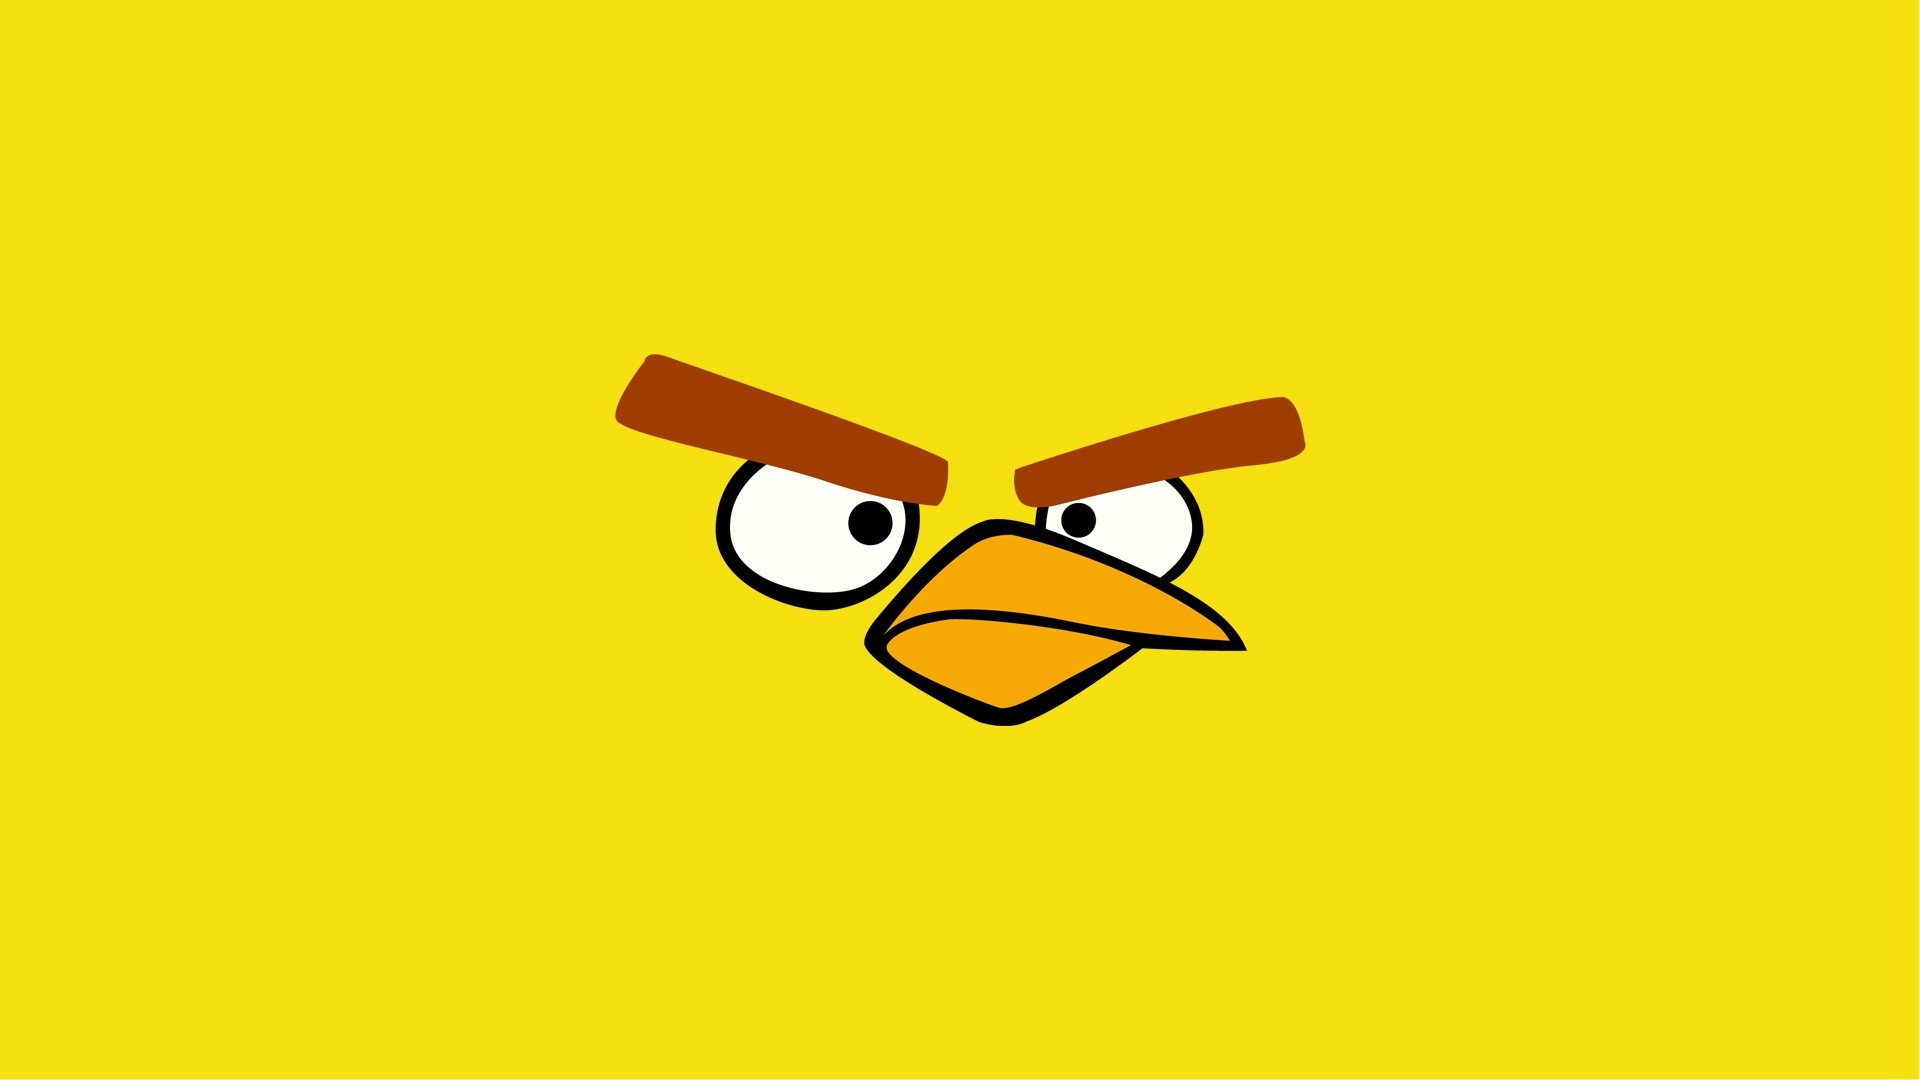 video, Games, Minimalistic, Yellow, Angry, Birds, Yellow, Background Wallpaper